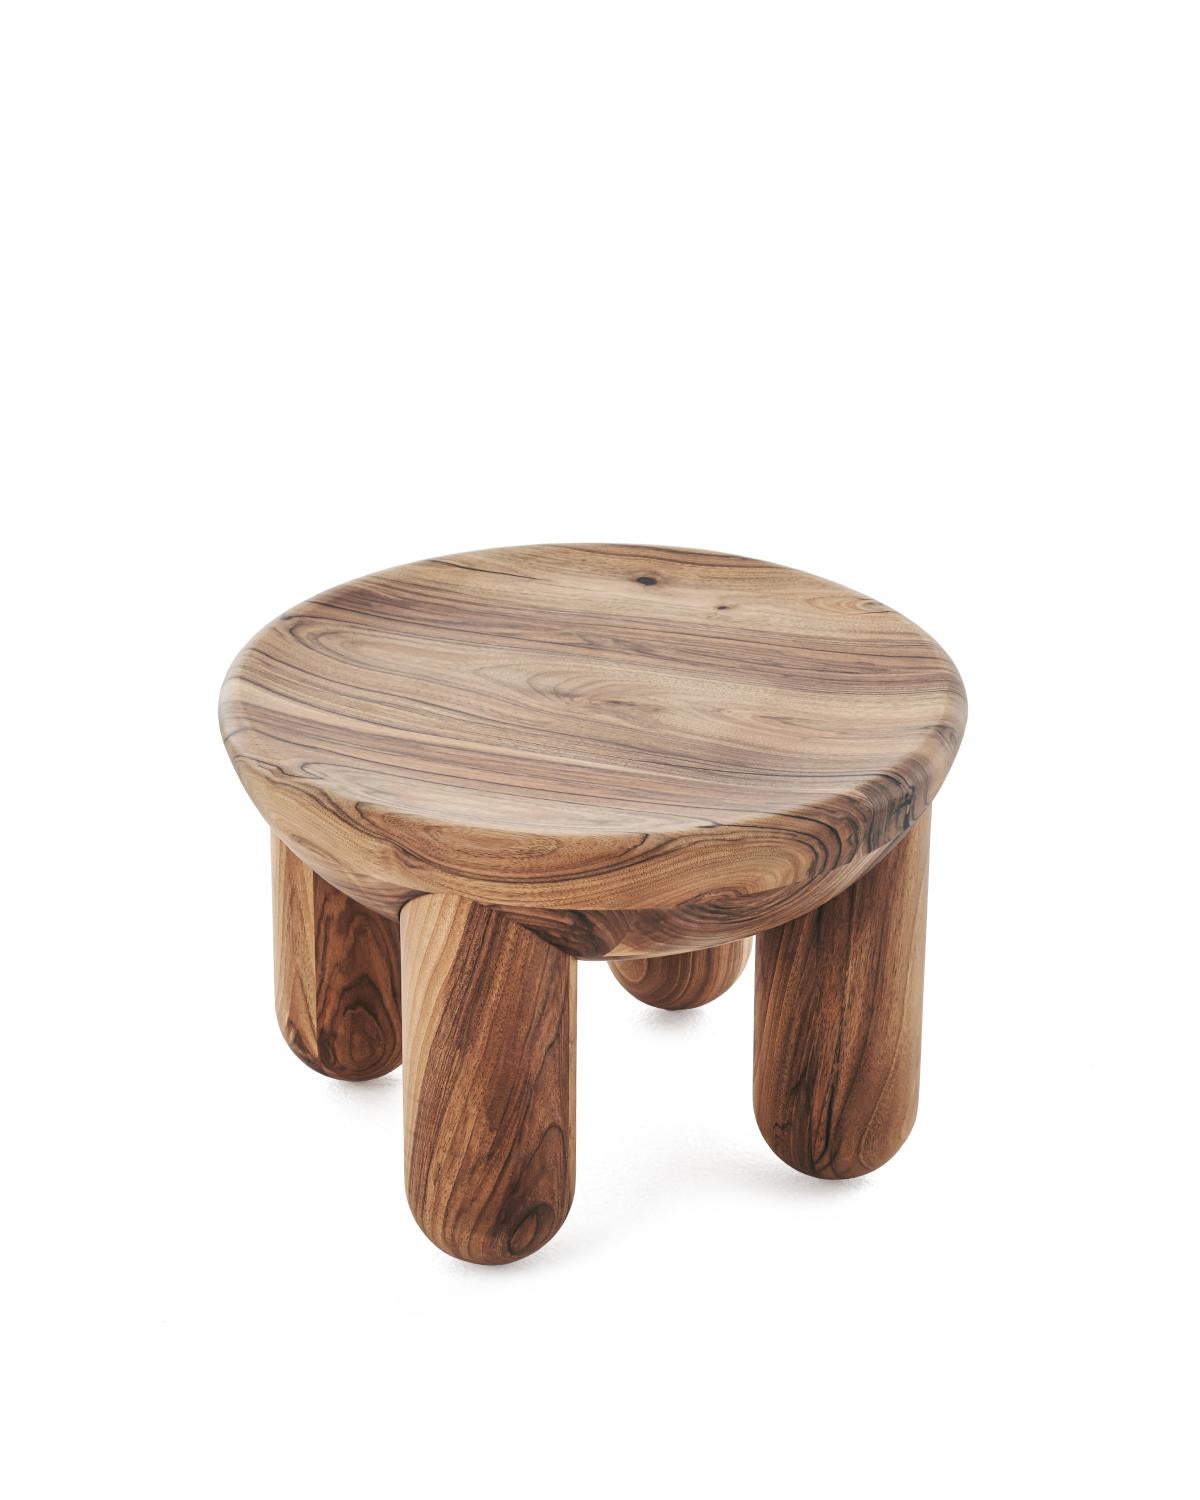 Wooden Coffee Table Freyja 1 in Brown Stained Ash finish by Noom 10